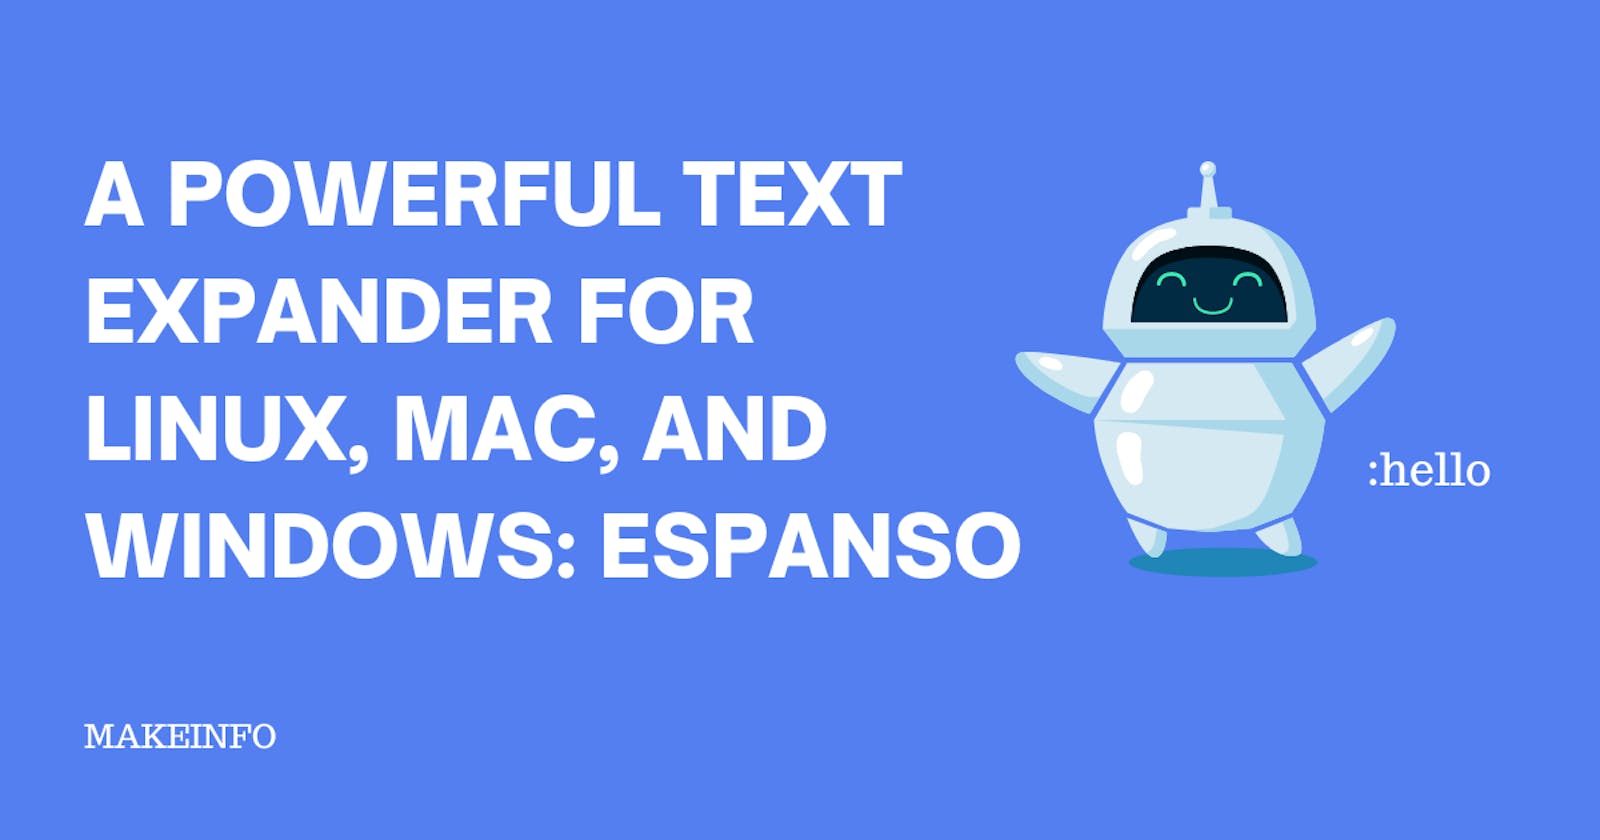 Espanso: A Powerful Text Expander for Linux, Mac, and Windows